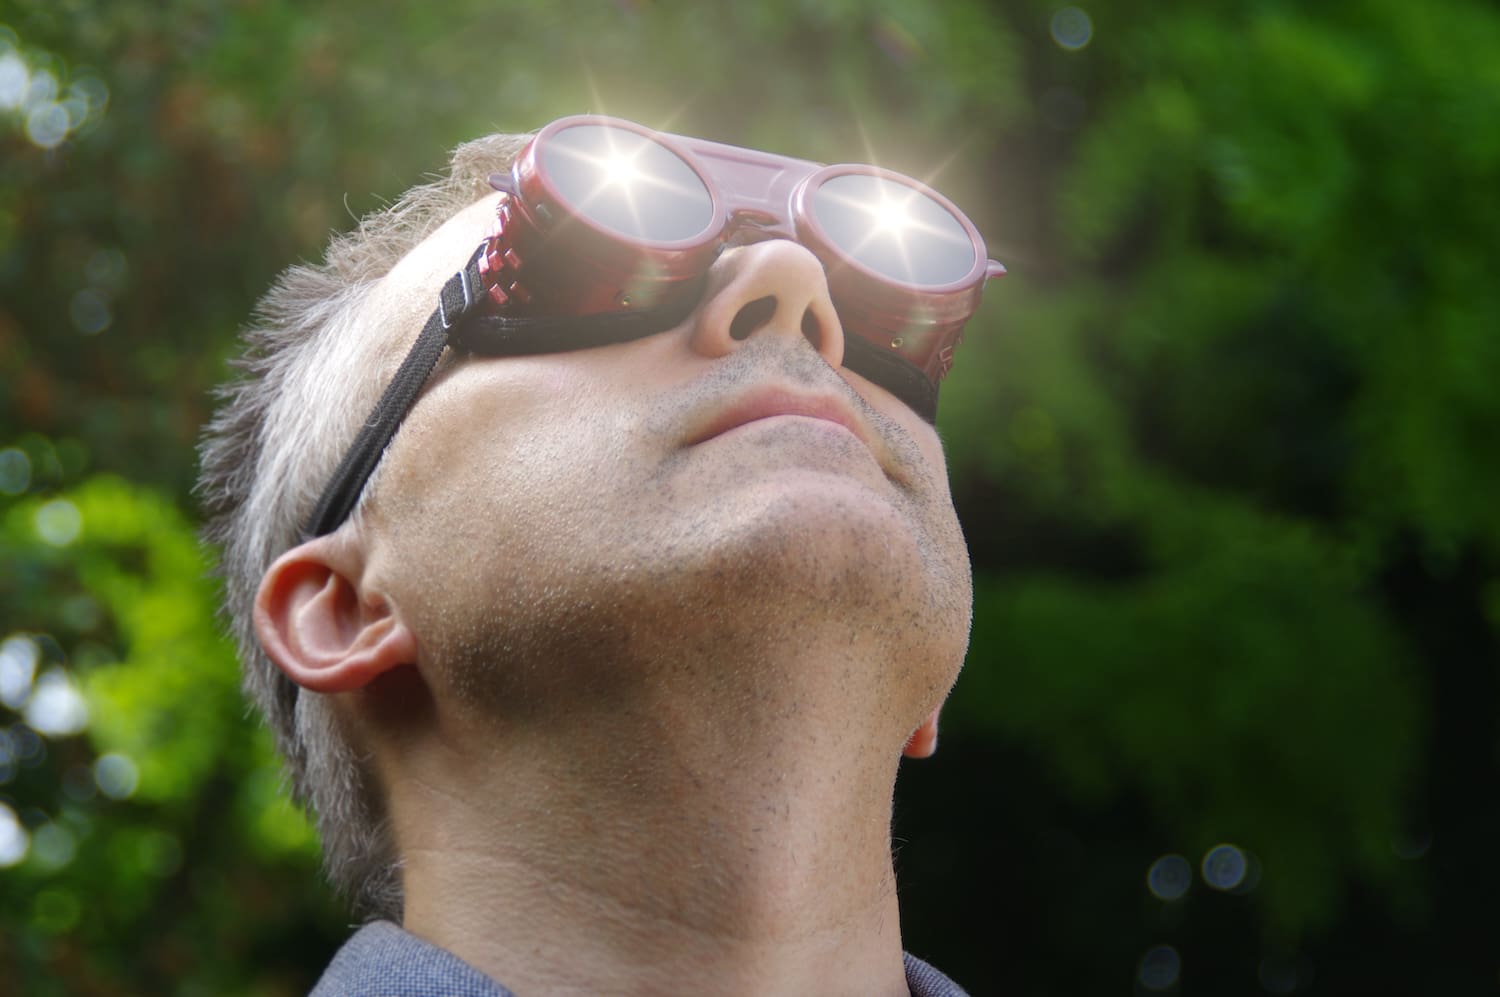 Man watching a sun eclipse through safety glasses. Looking at the solar phenomenon.